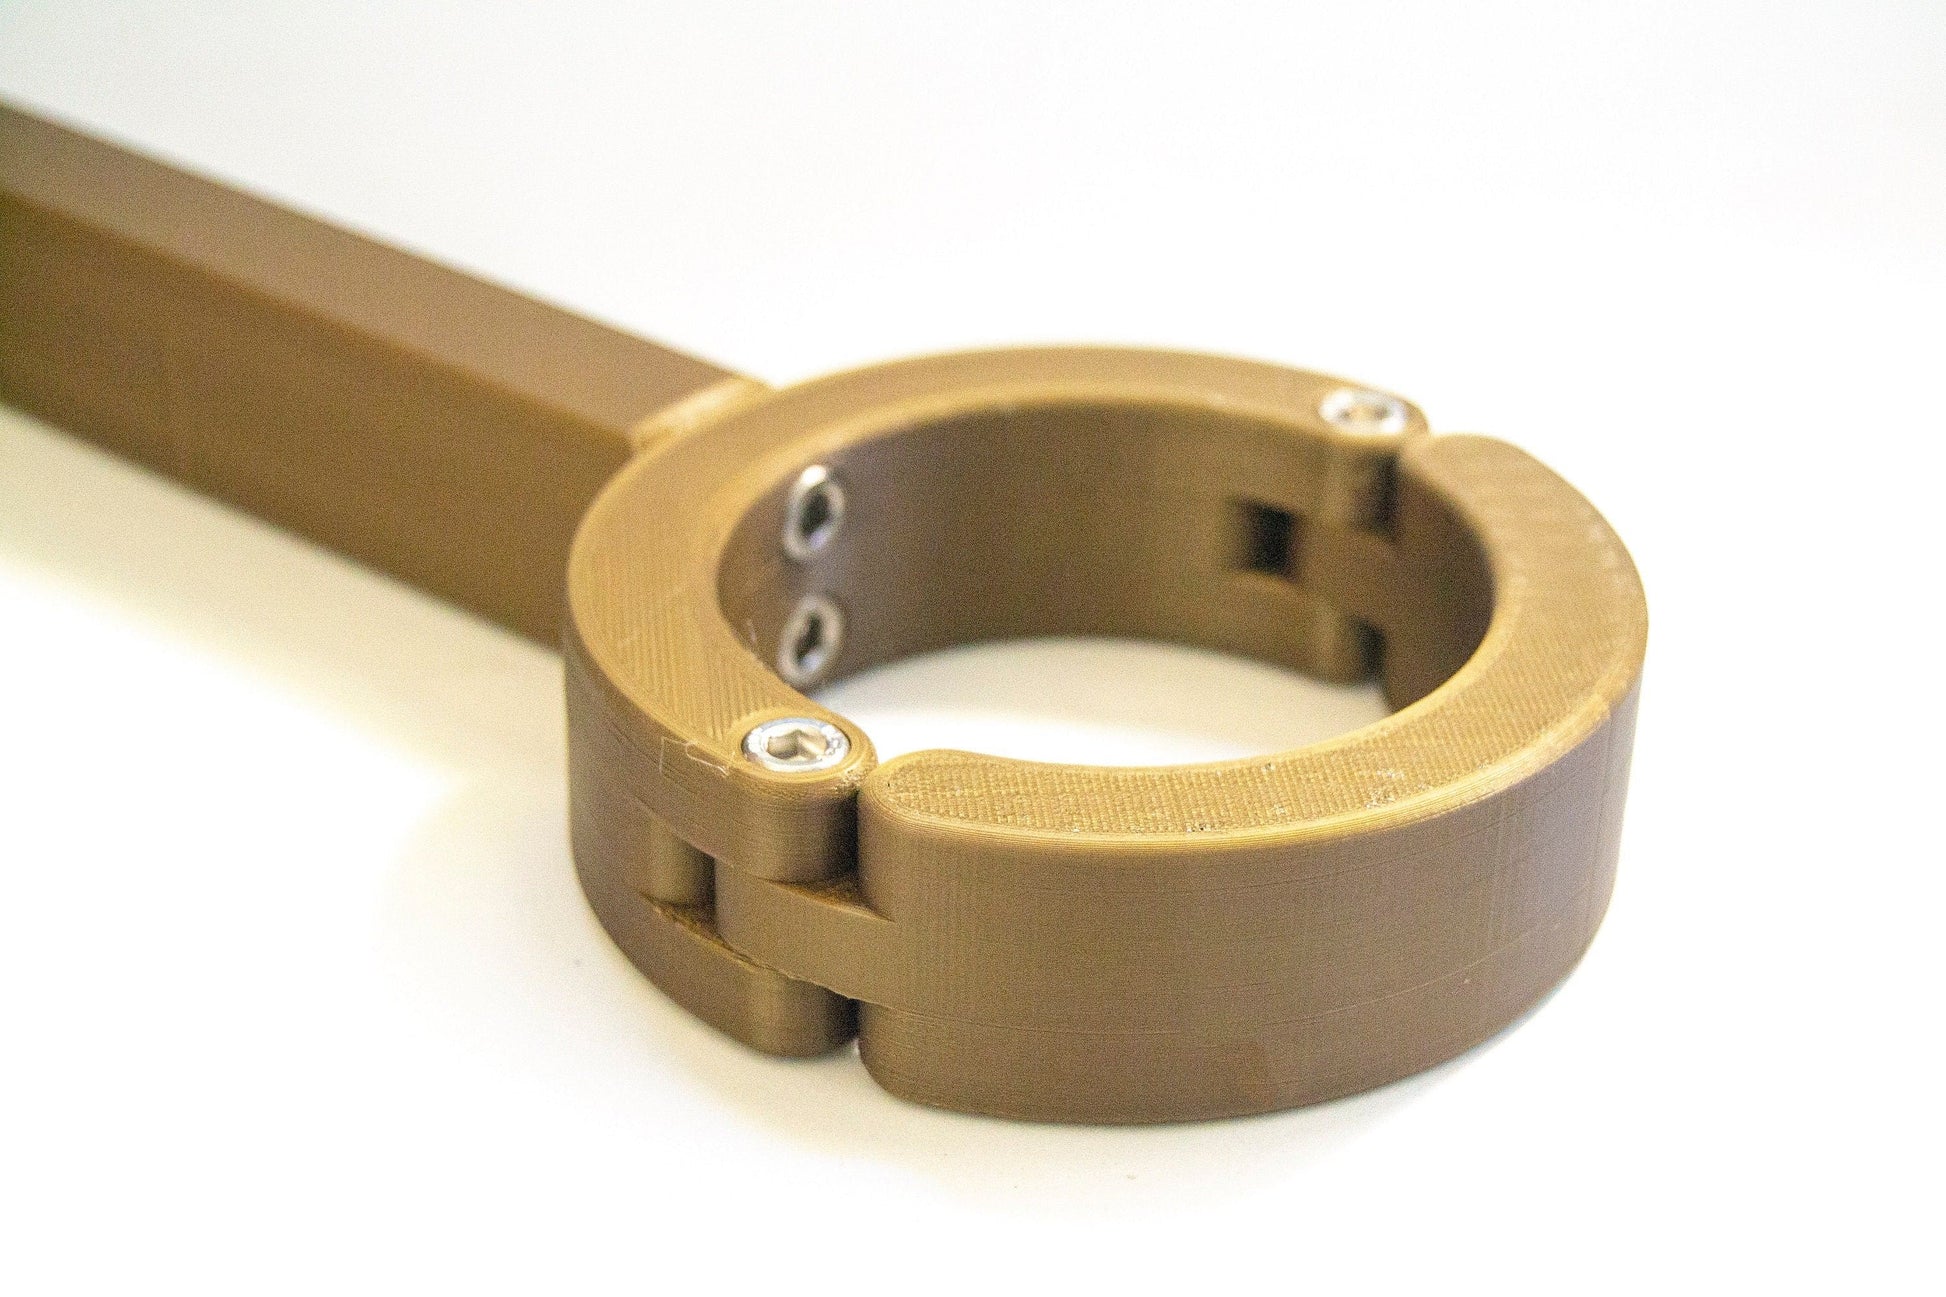 Spreader Bar for Elbows, Wrists or Ankles | 3D Printed - XPrint3D